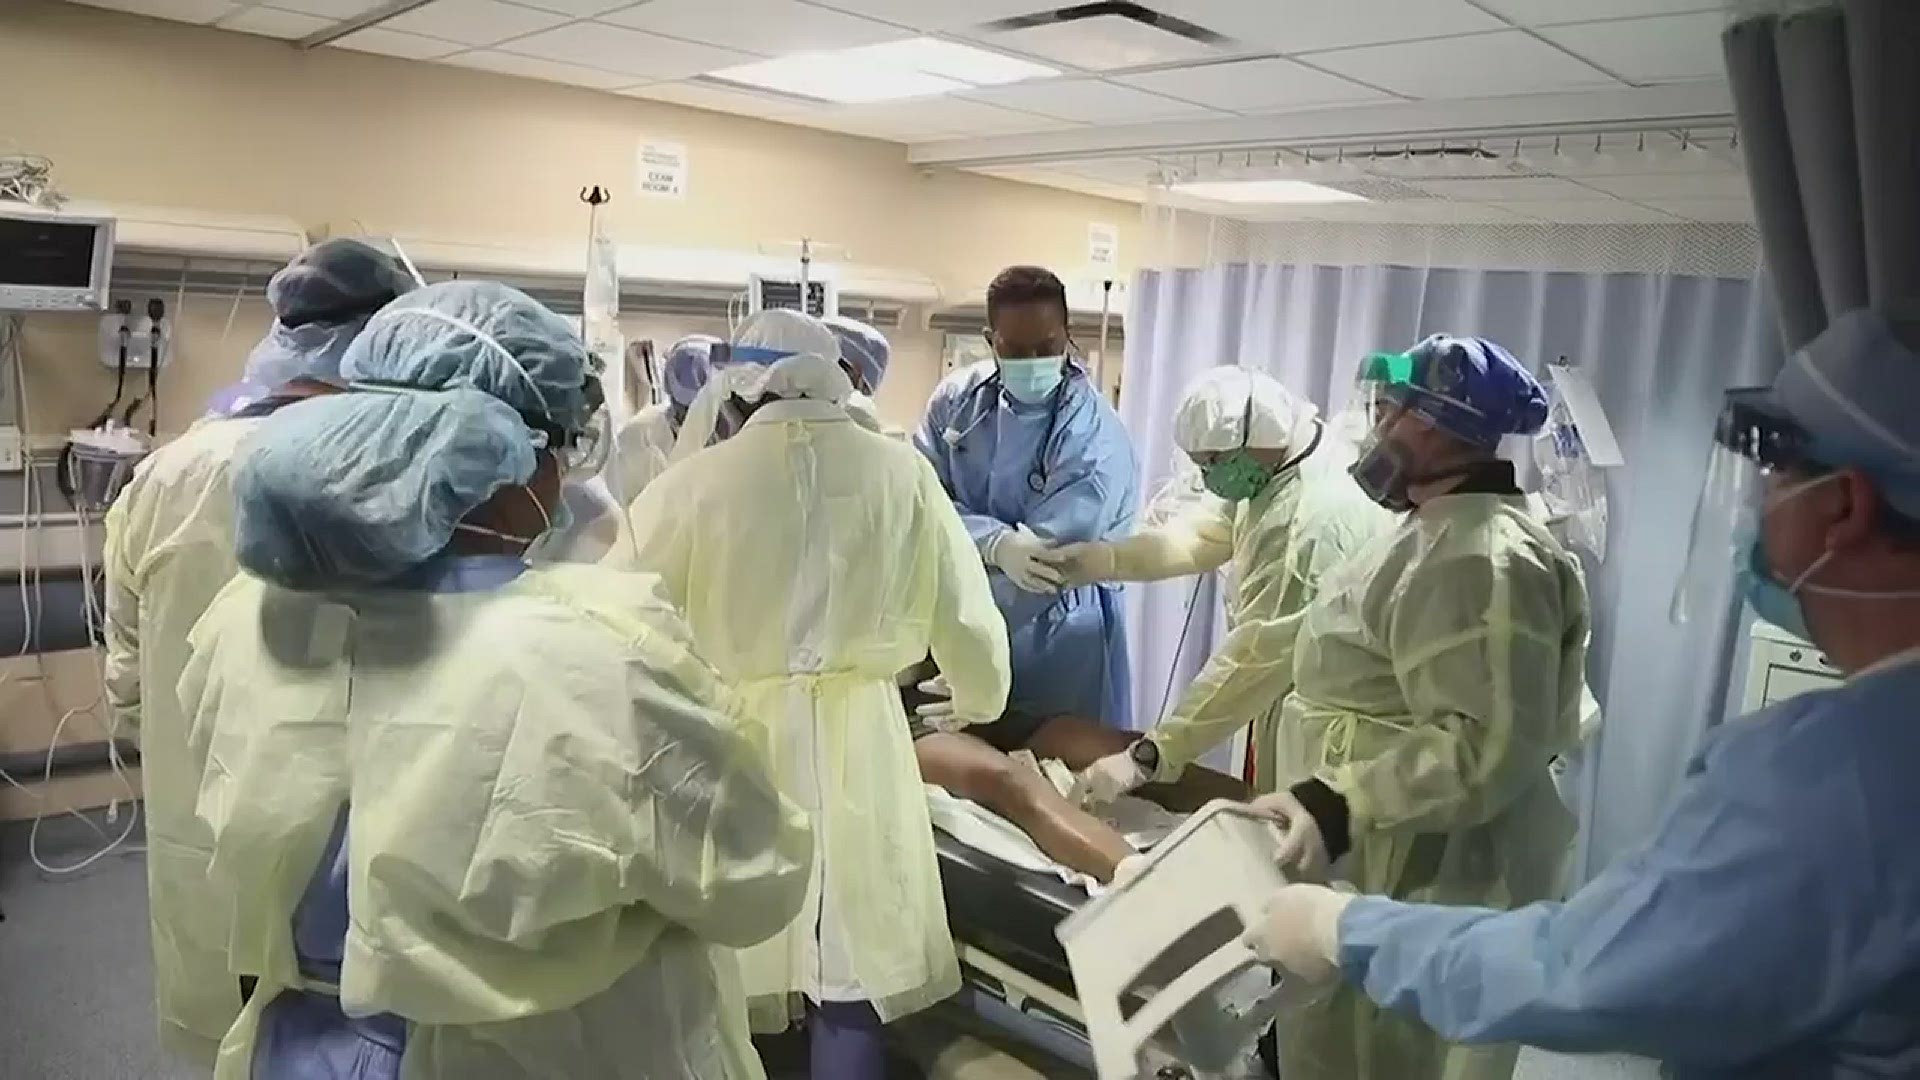 Warning: This video could be disturbing to some viewers. Doctors battle COVID-19 in Westchester, where 900 people have died, making it a new coronavirus hot spot.